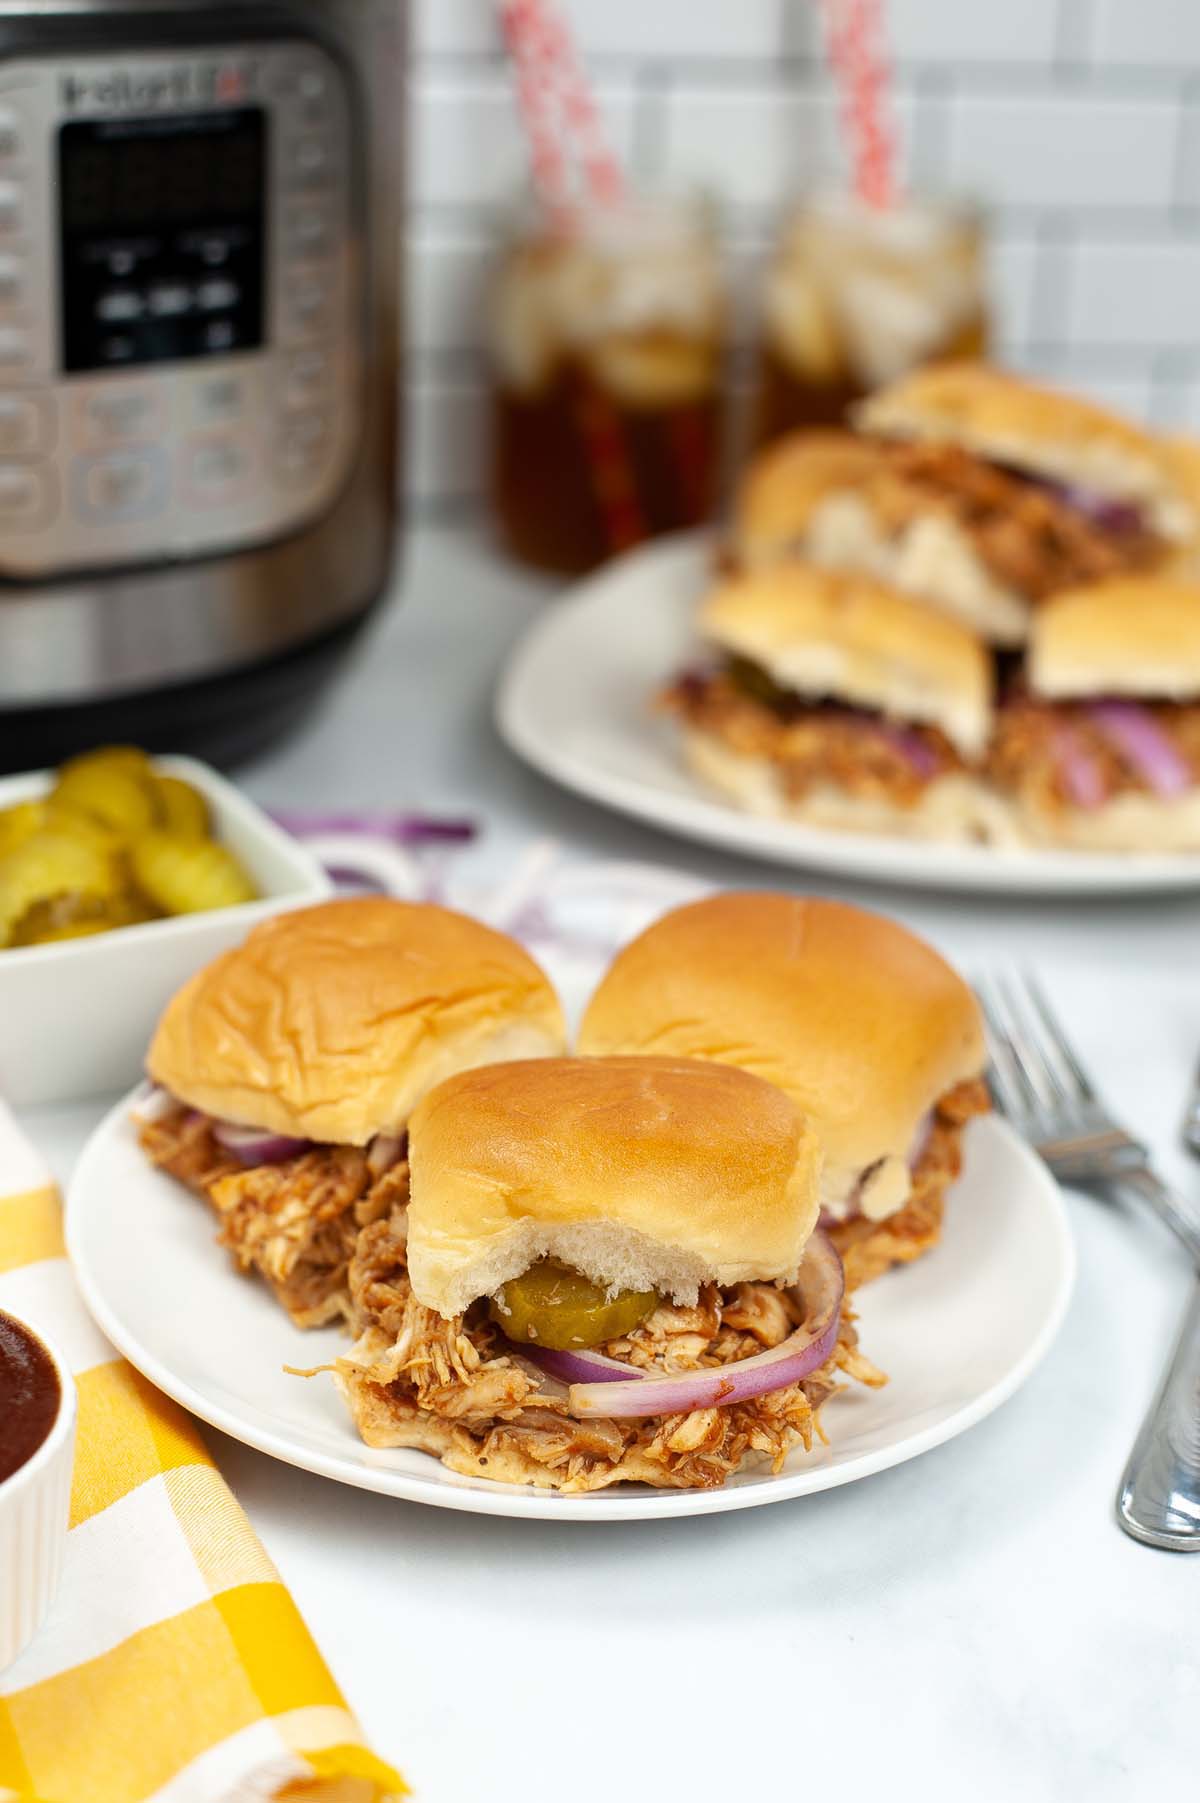 Sliders on a plate in front of the Instant Pot.